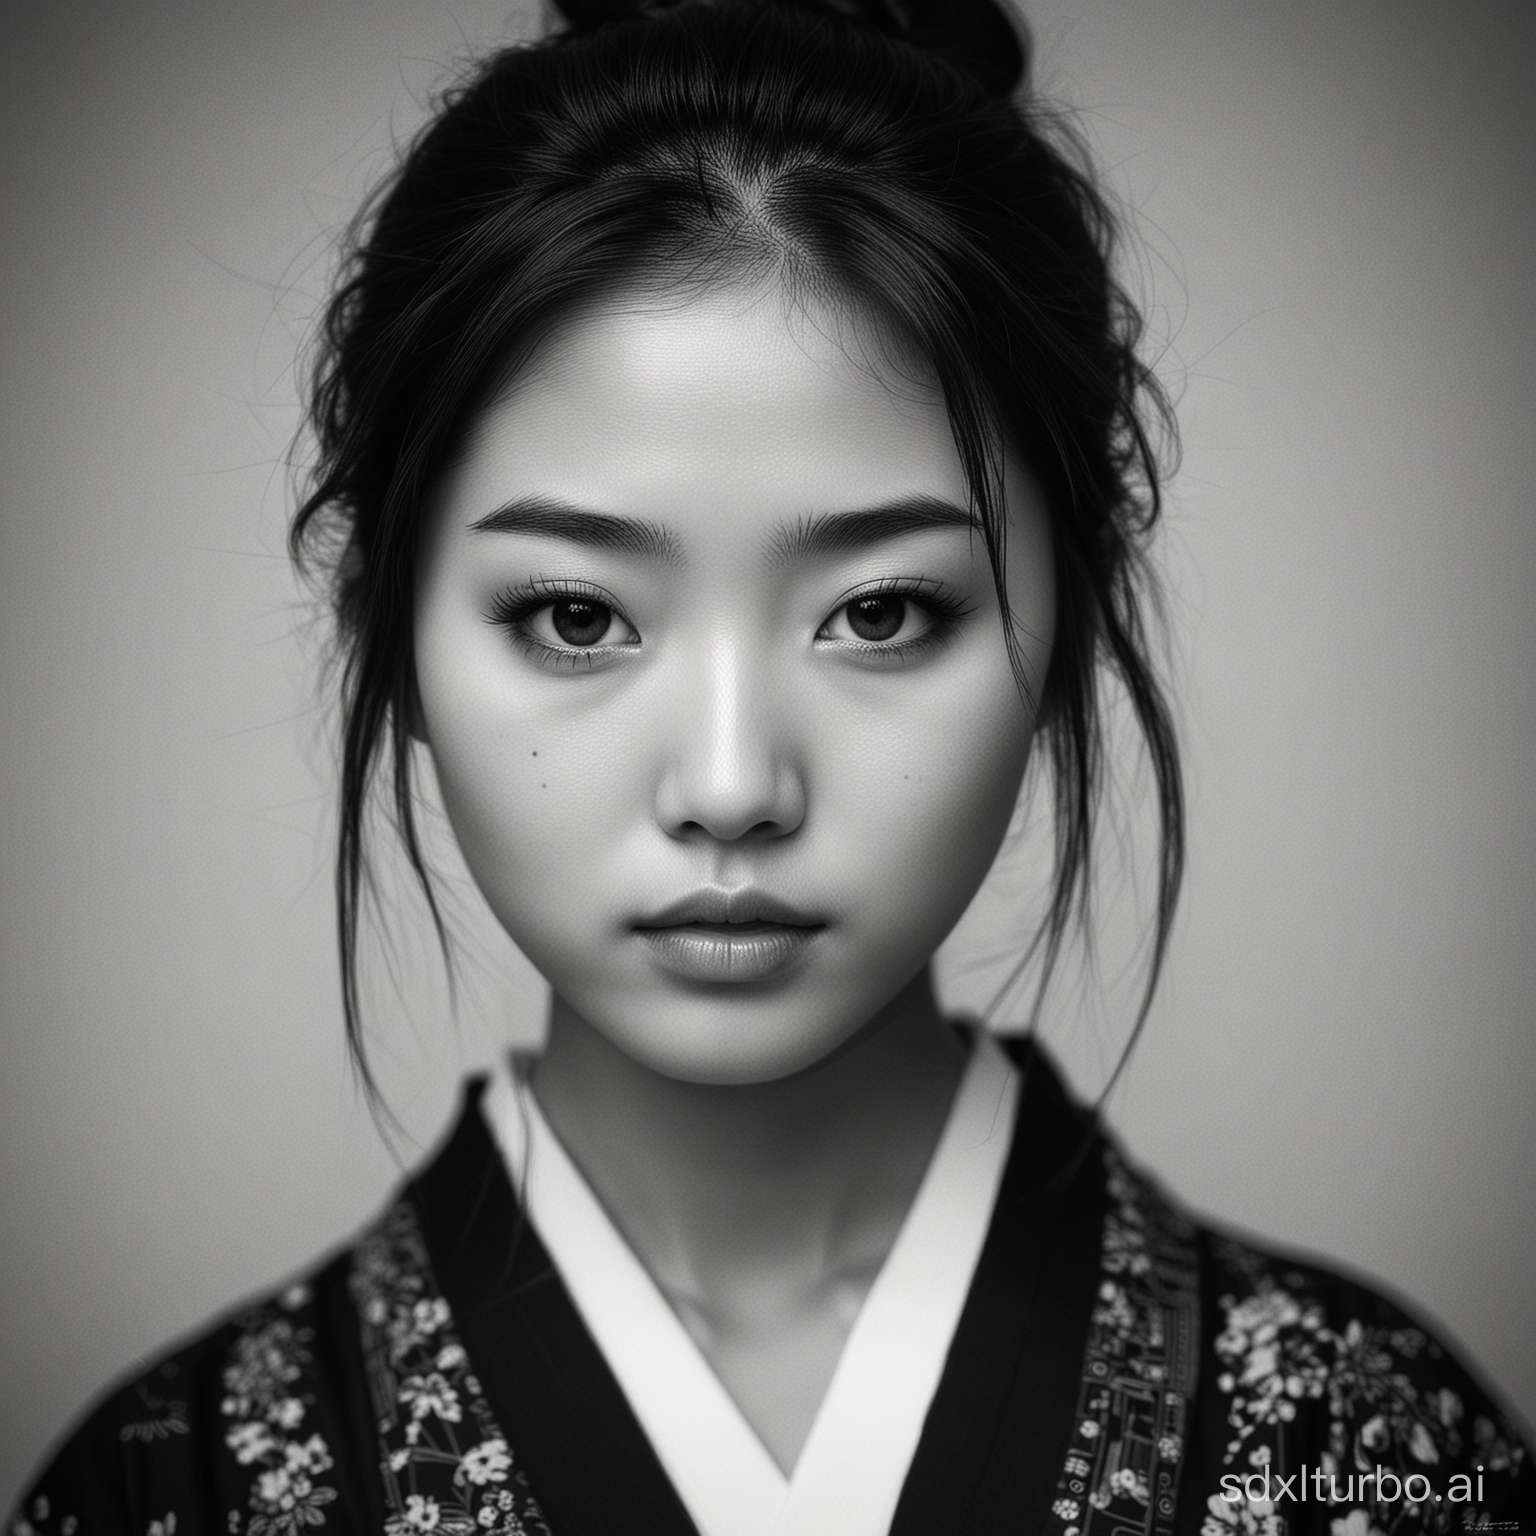 1 Japanese girl ,black and white photograph style of “Faces of A.Picolo" series